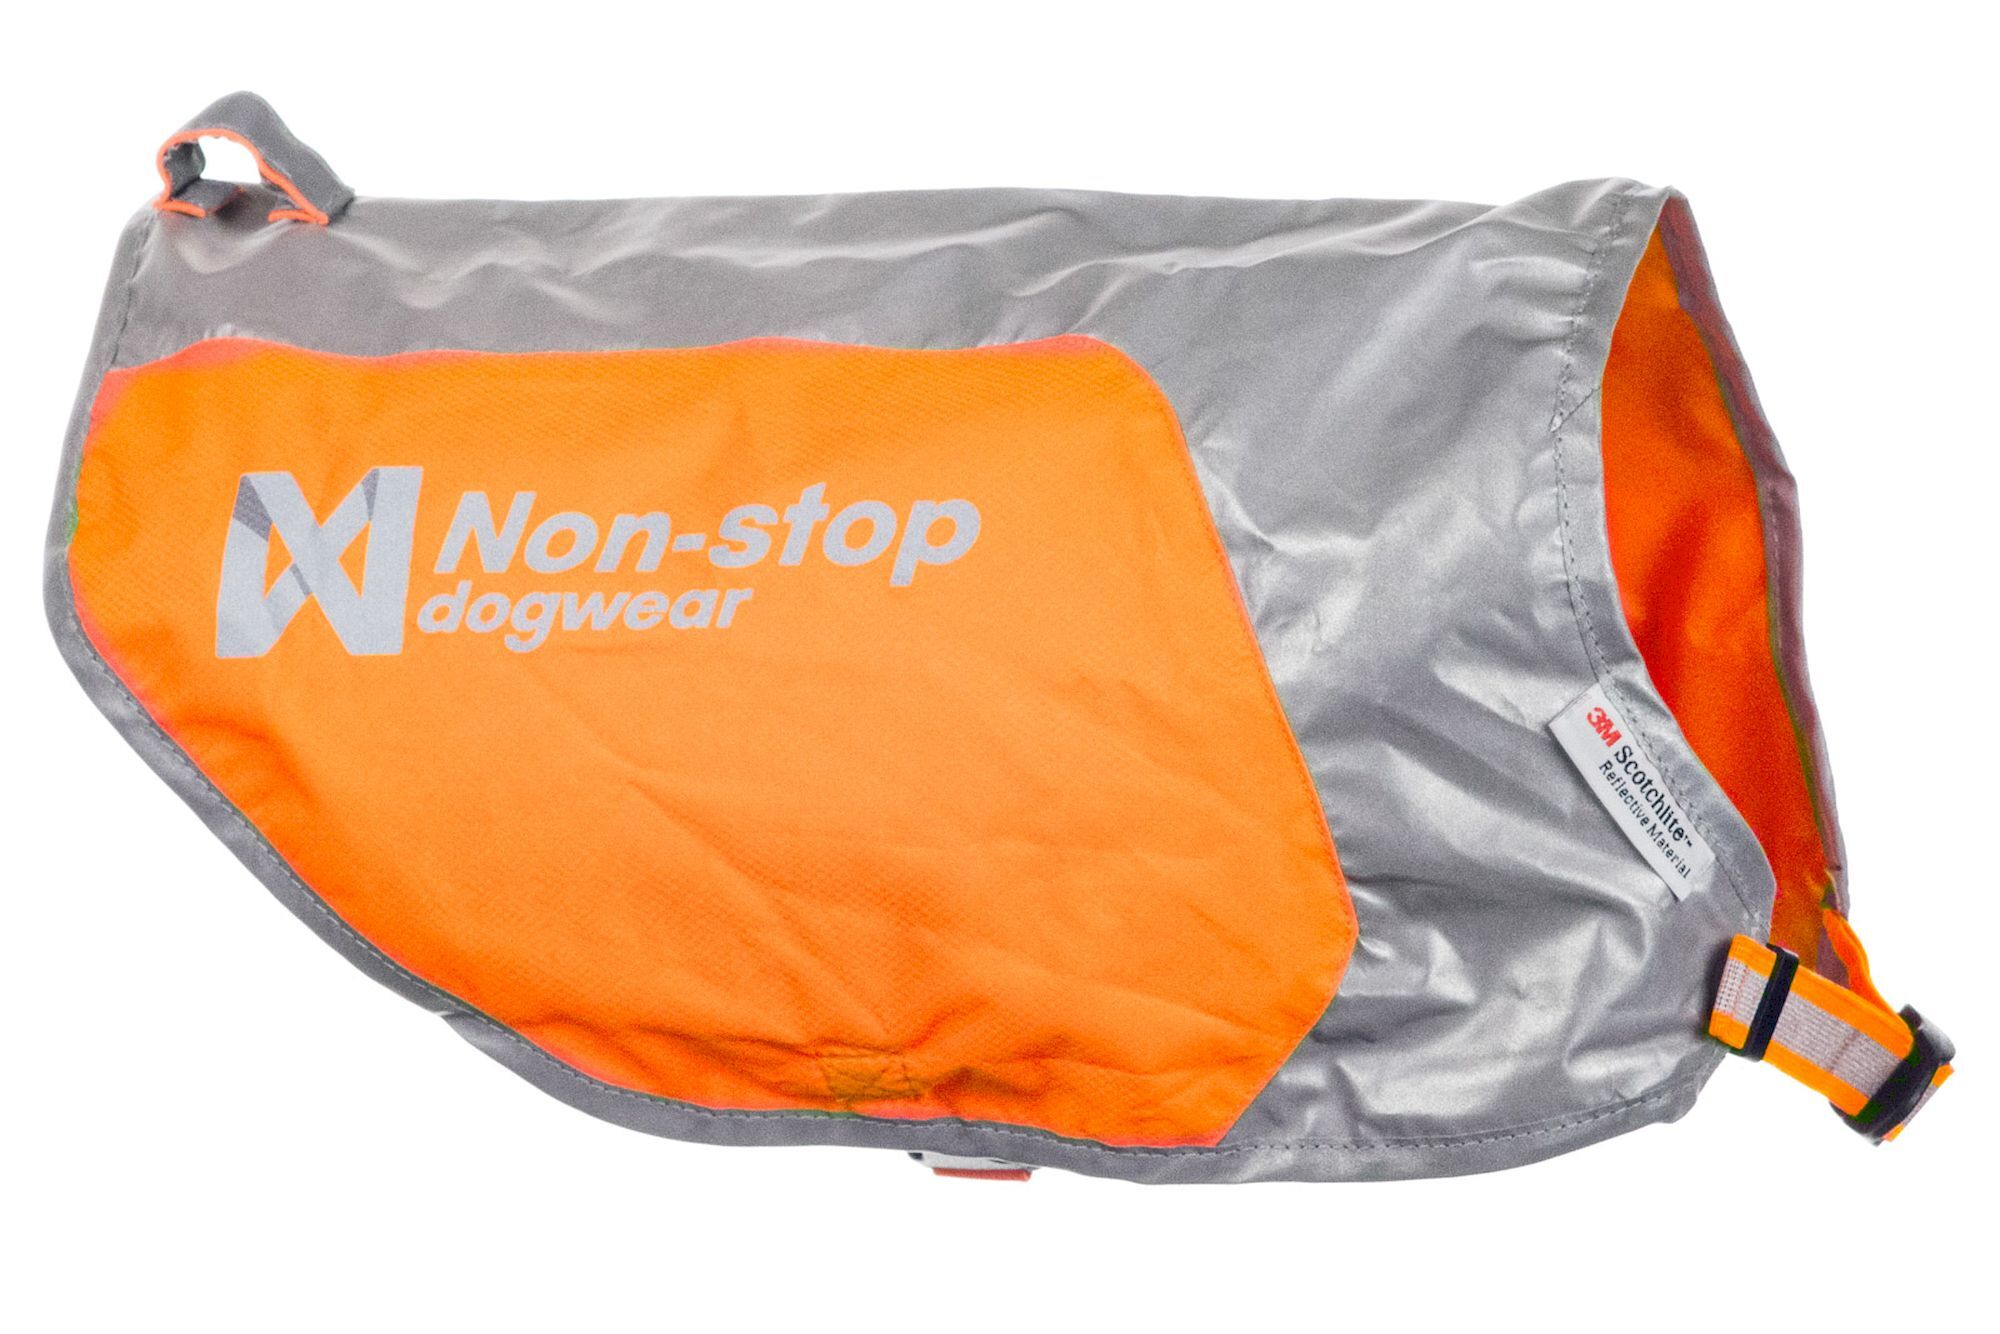 Non-stop dogwear Reflective Vest - Giacca per cani | Hardloop